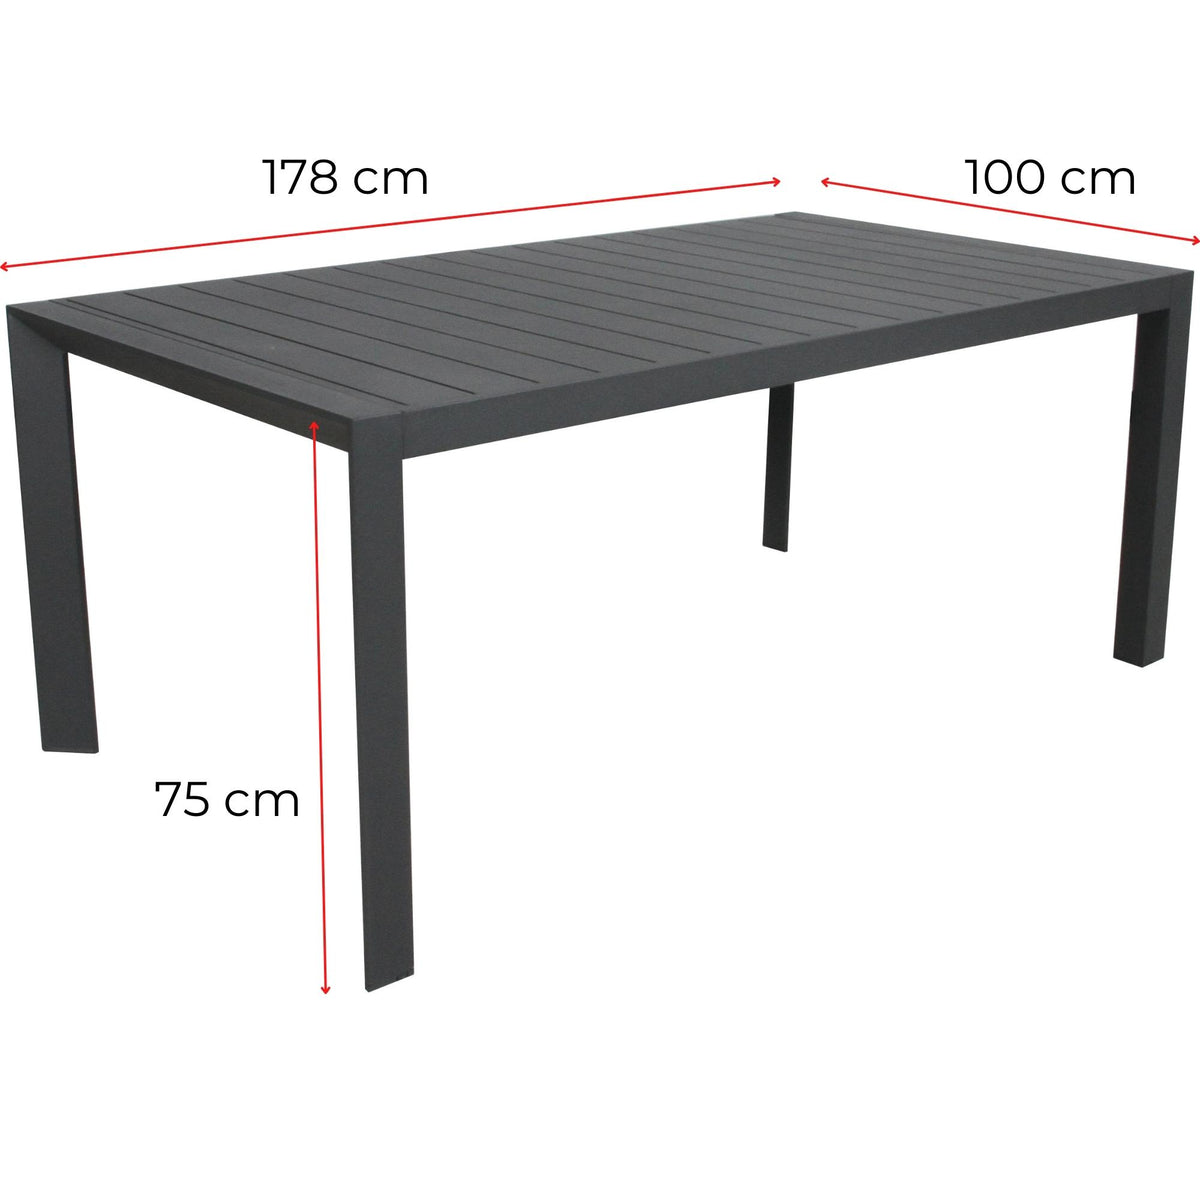 Iberia 178cm Outdoor Dining Table Charcoal 